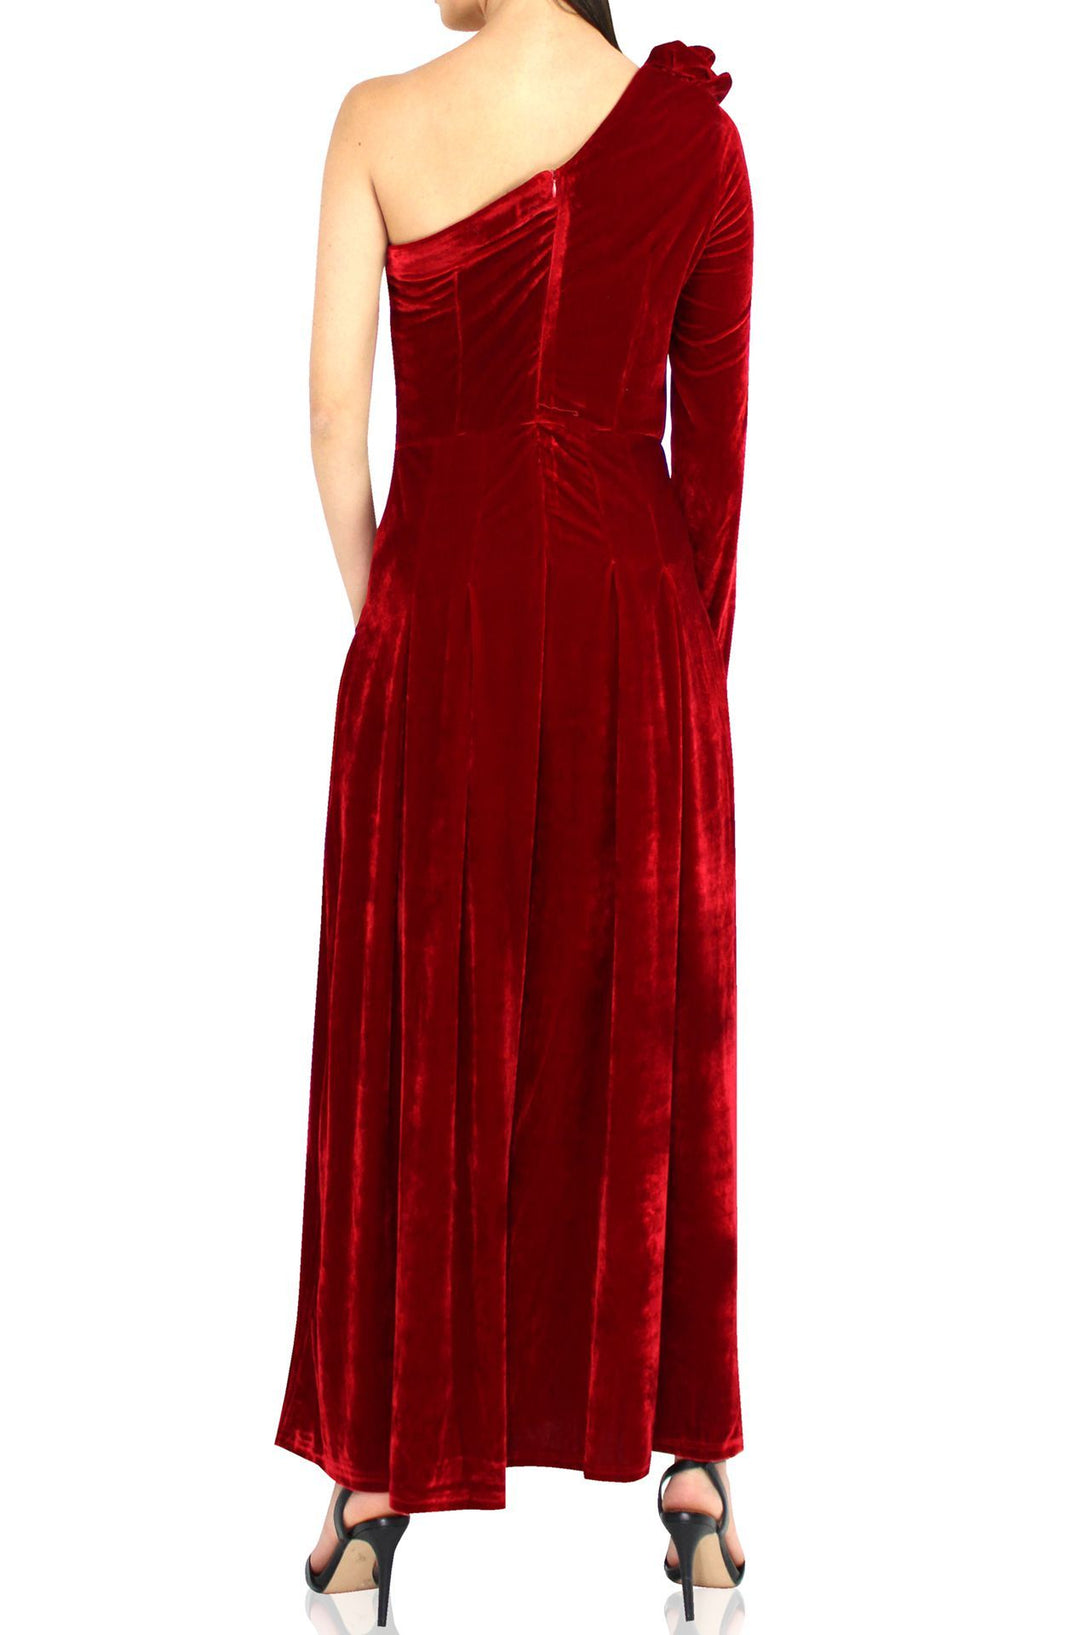 One-Shoulder-Long-Dress-In-Red-By-Kyle